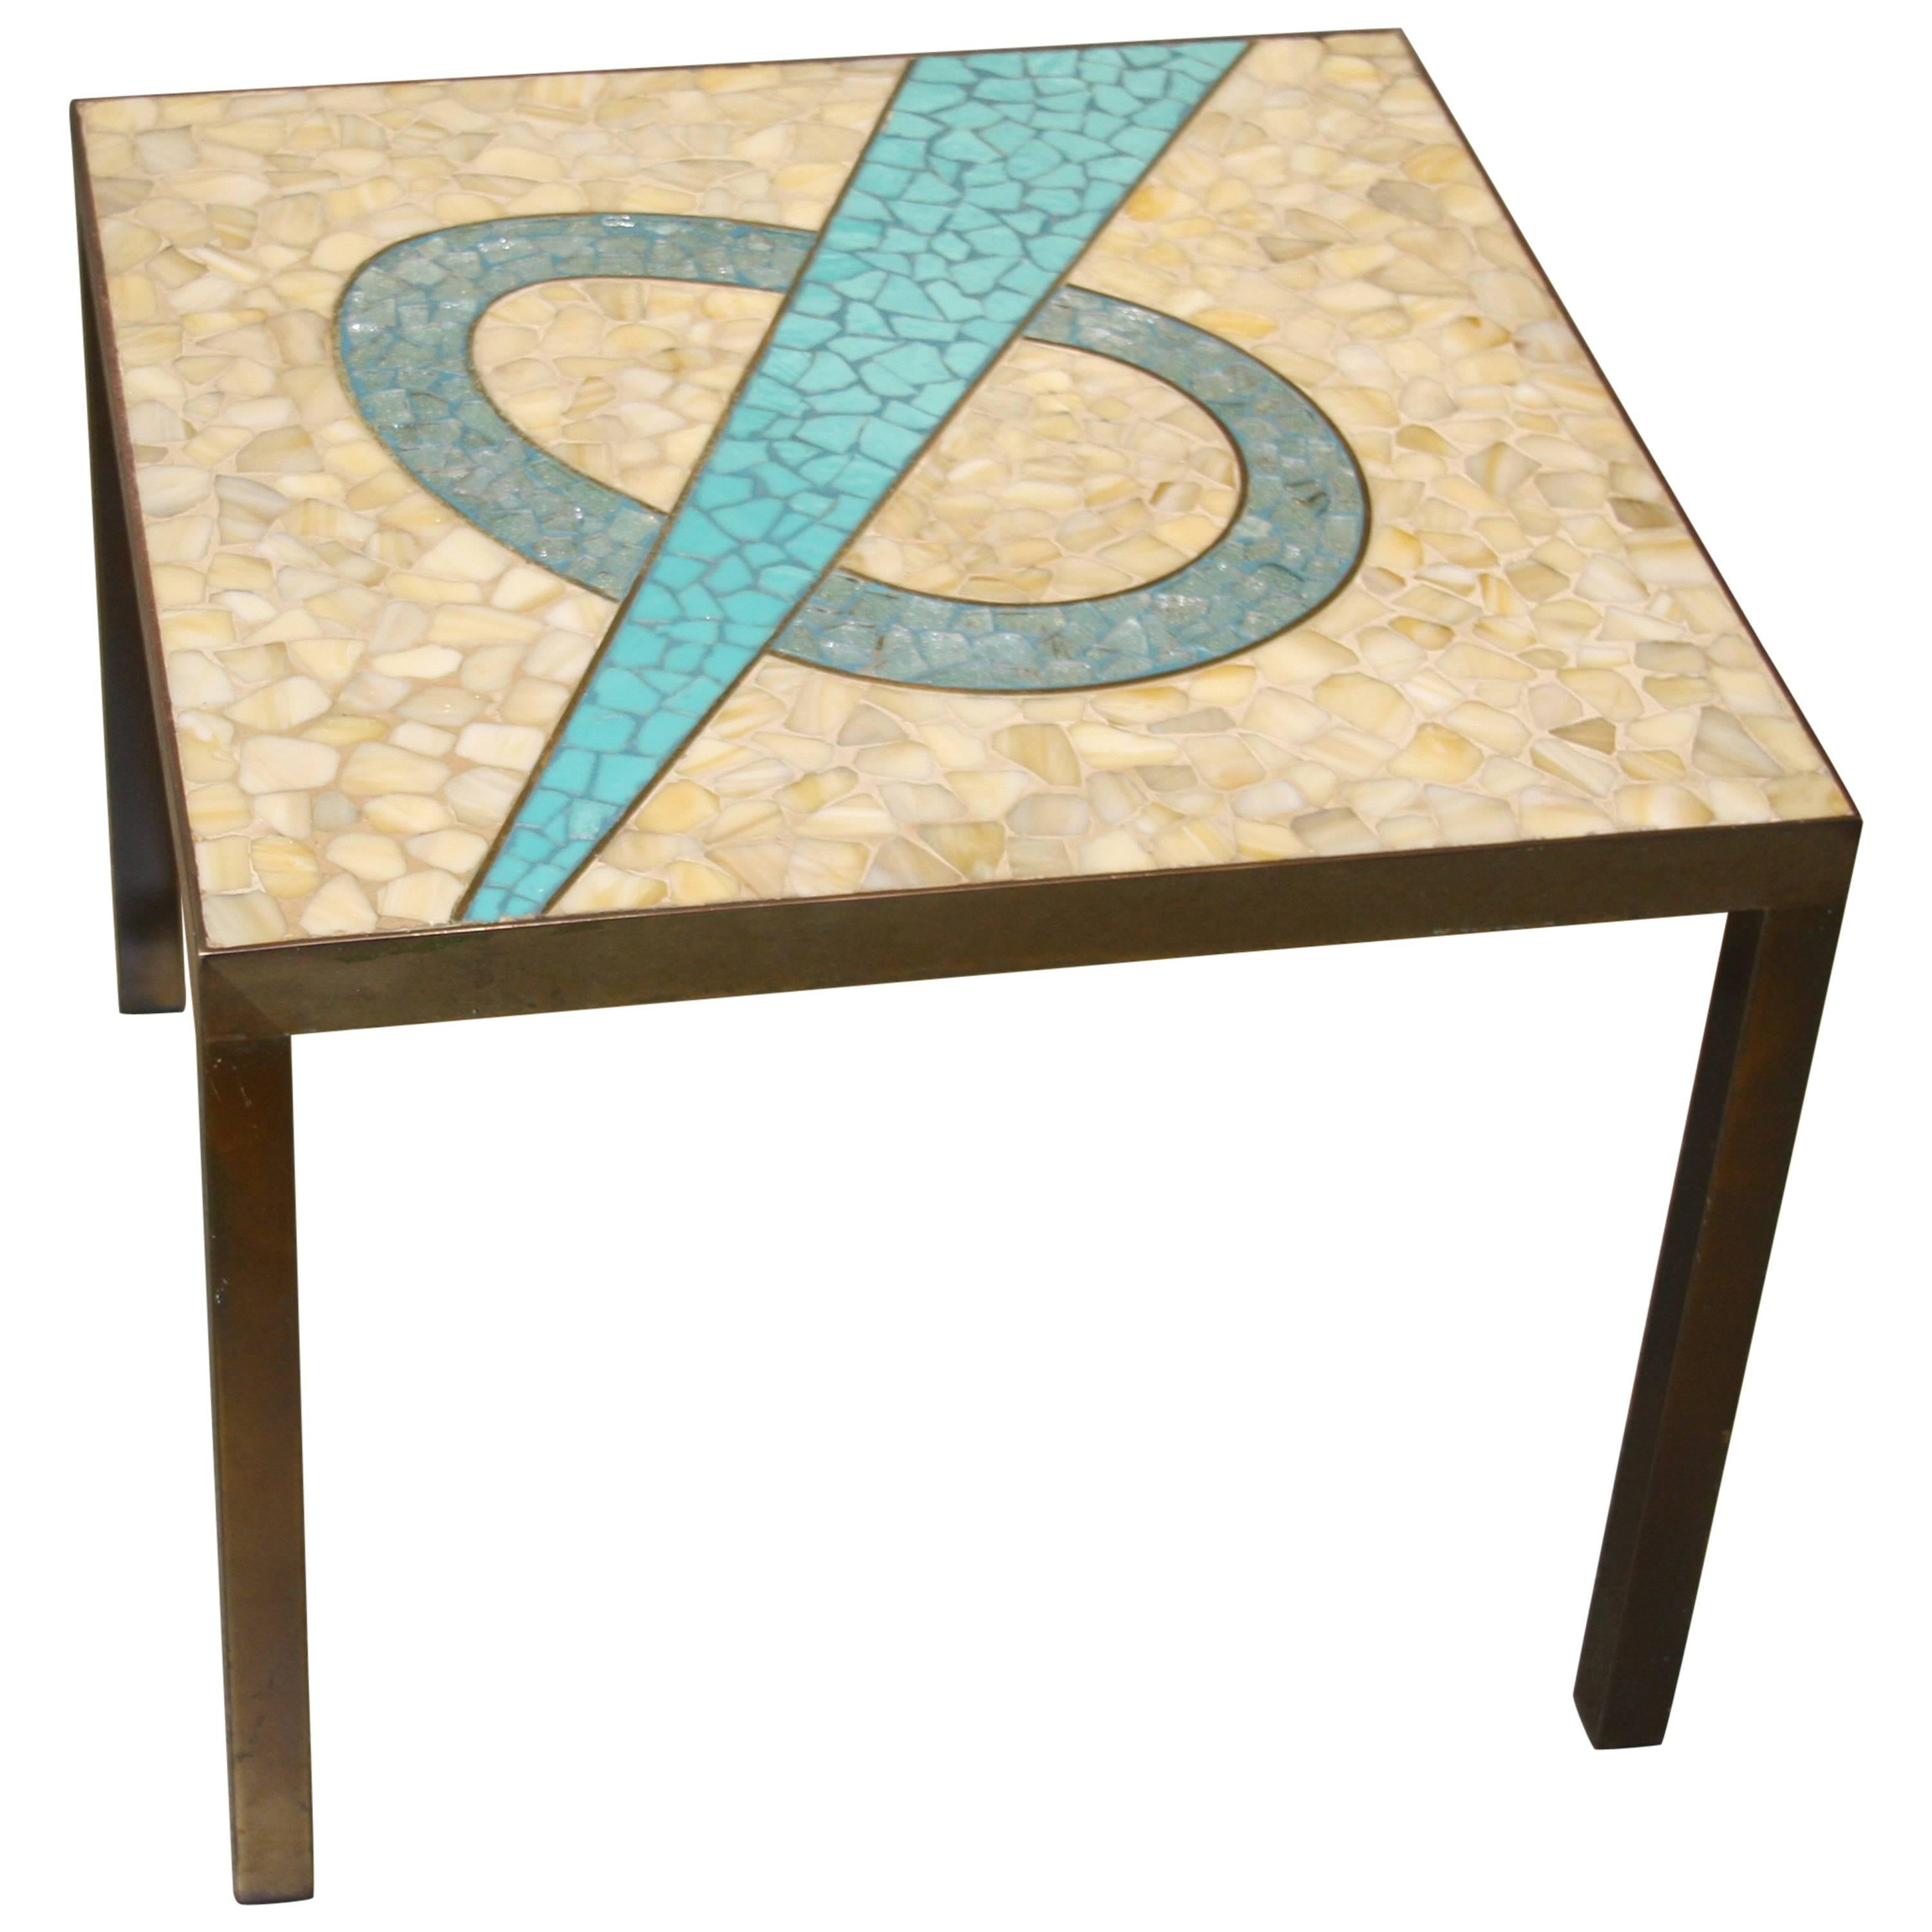 Nice Tile Top Table with a Bronze Patinated Frame